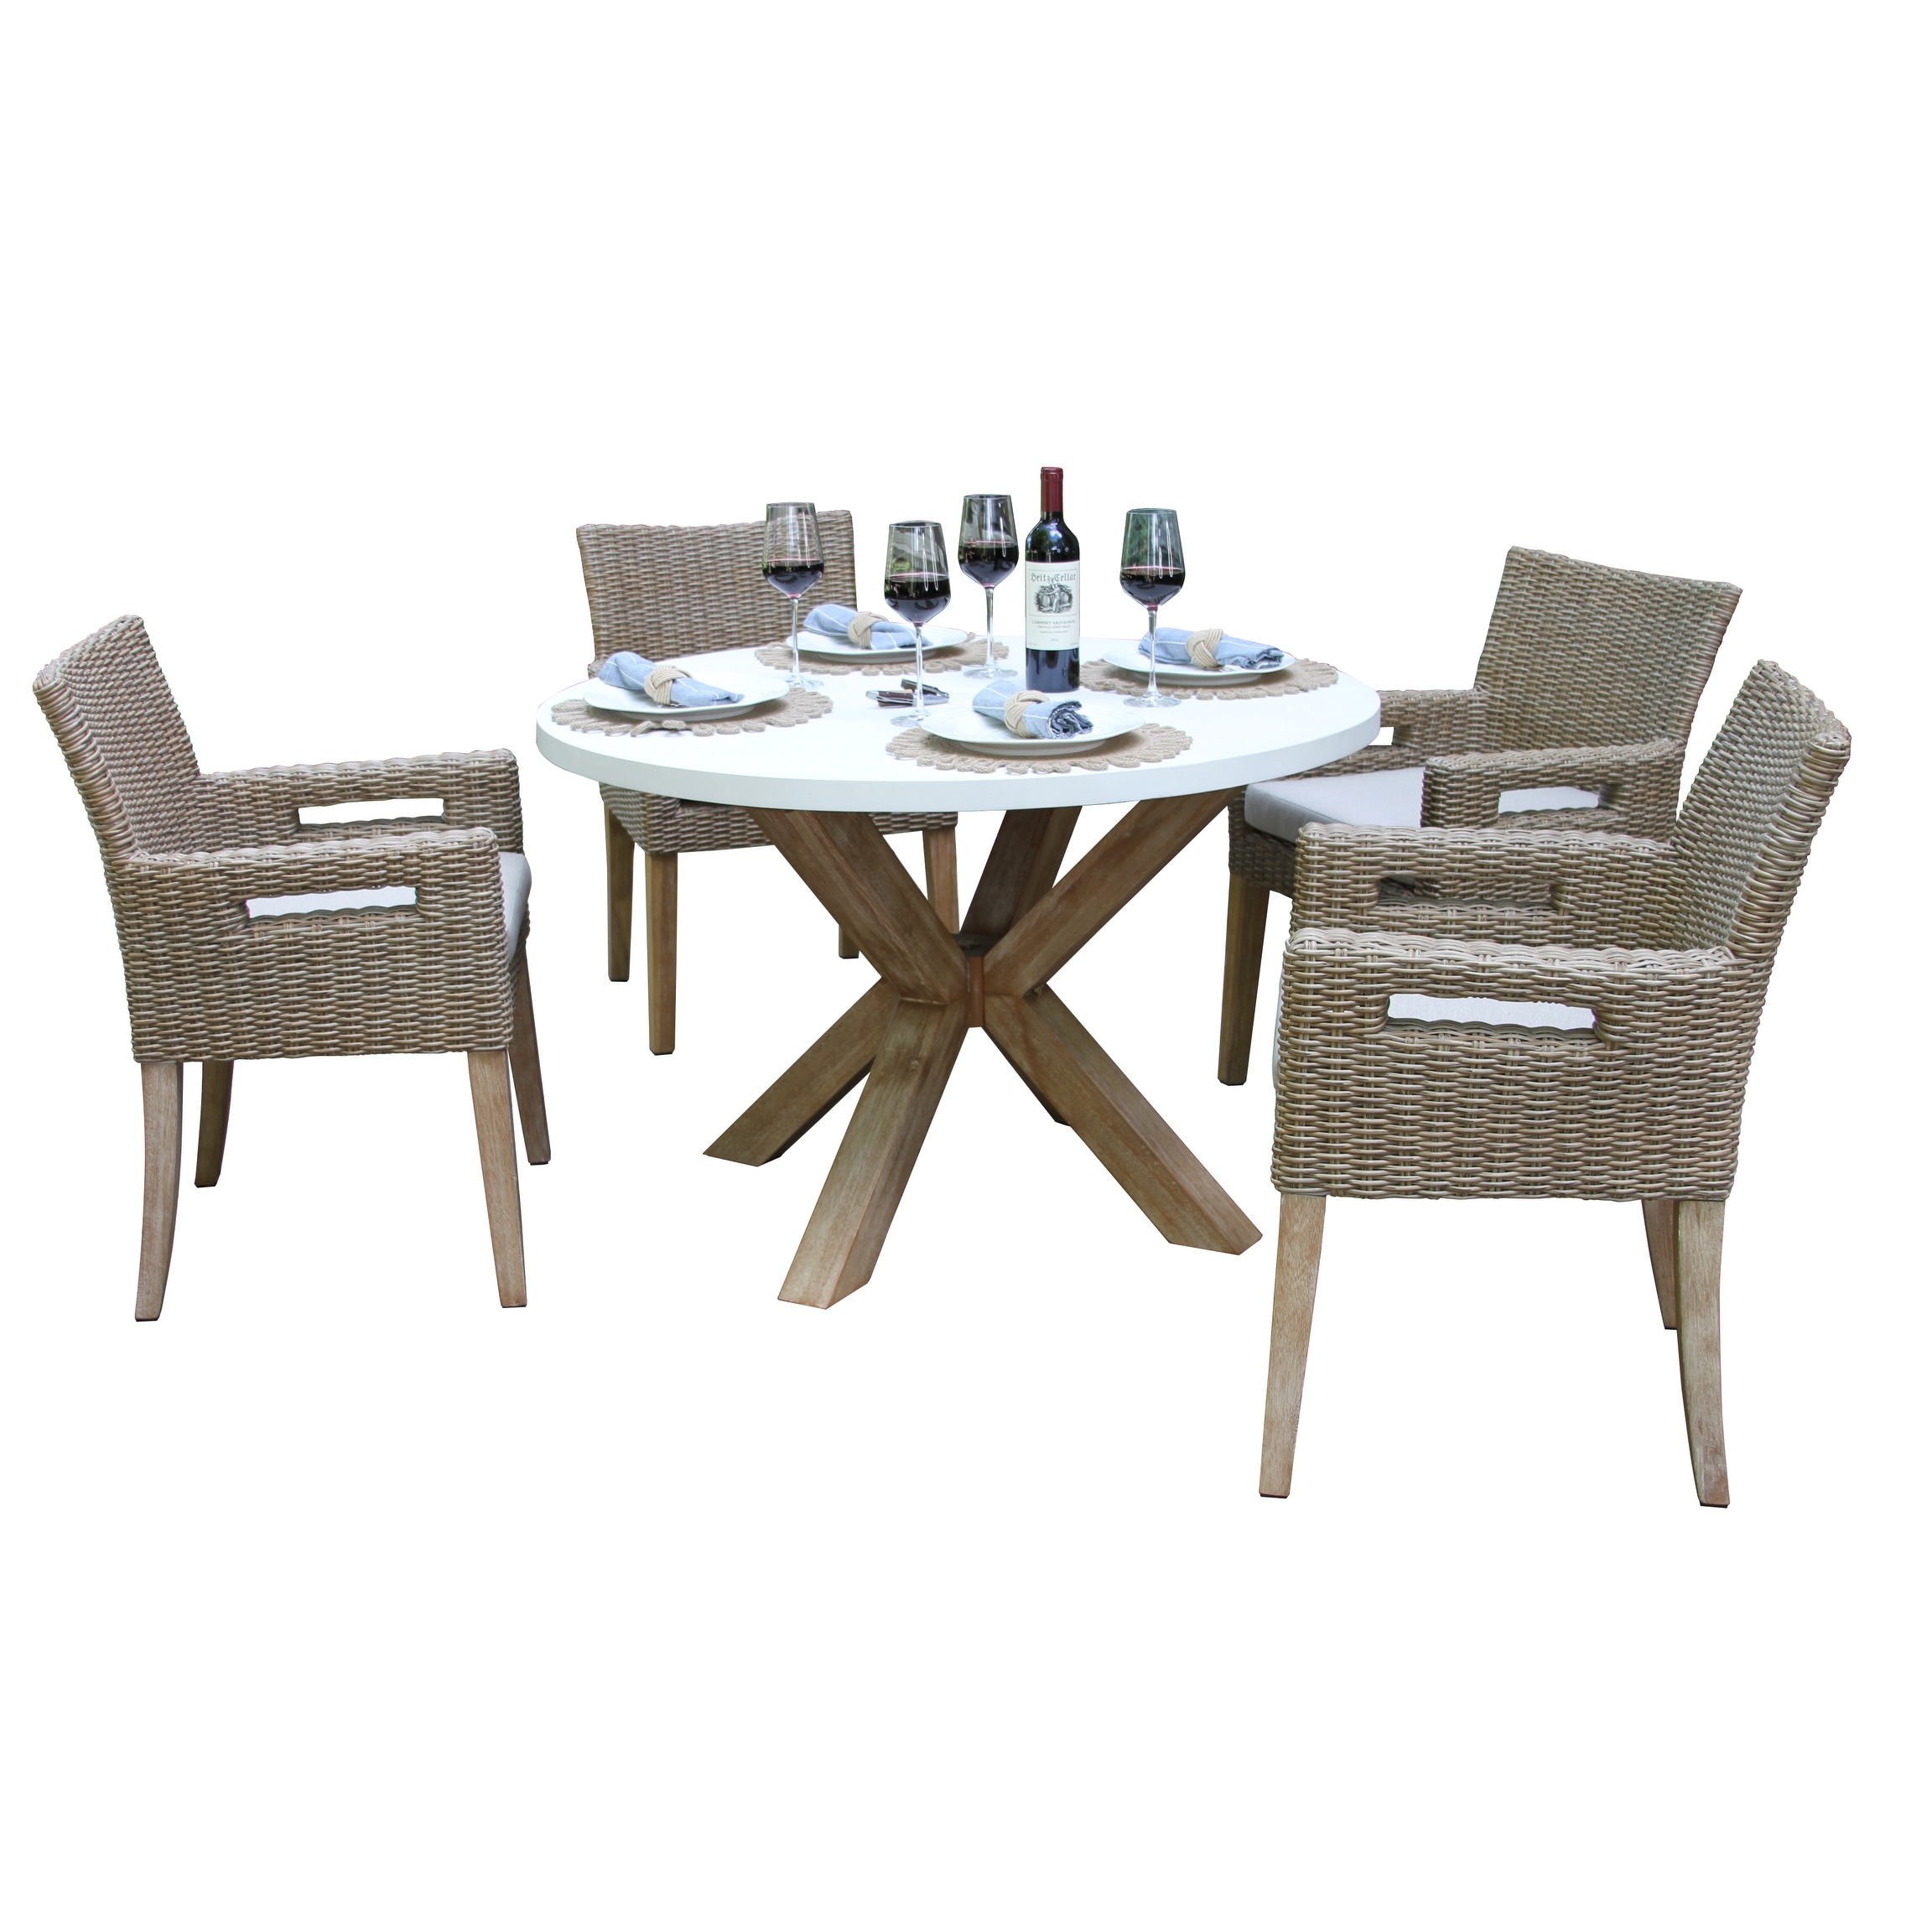 Cordelia 48 Ivory Composite Dining Table With 4 Wheat Wicker Chairs